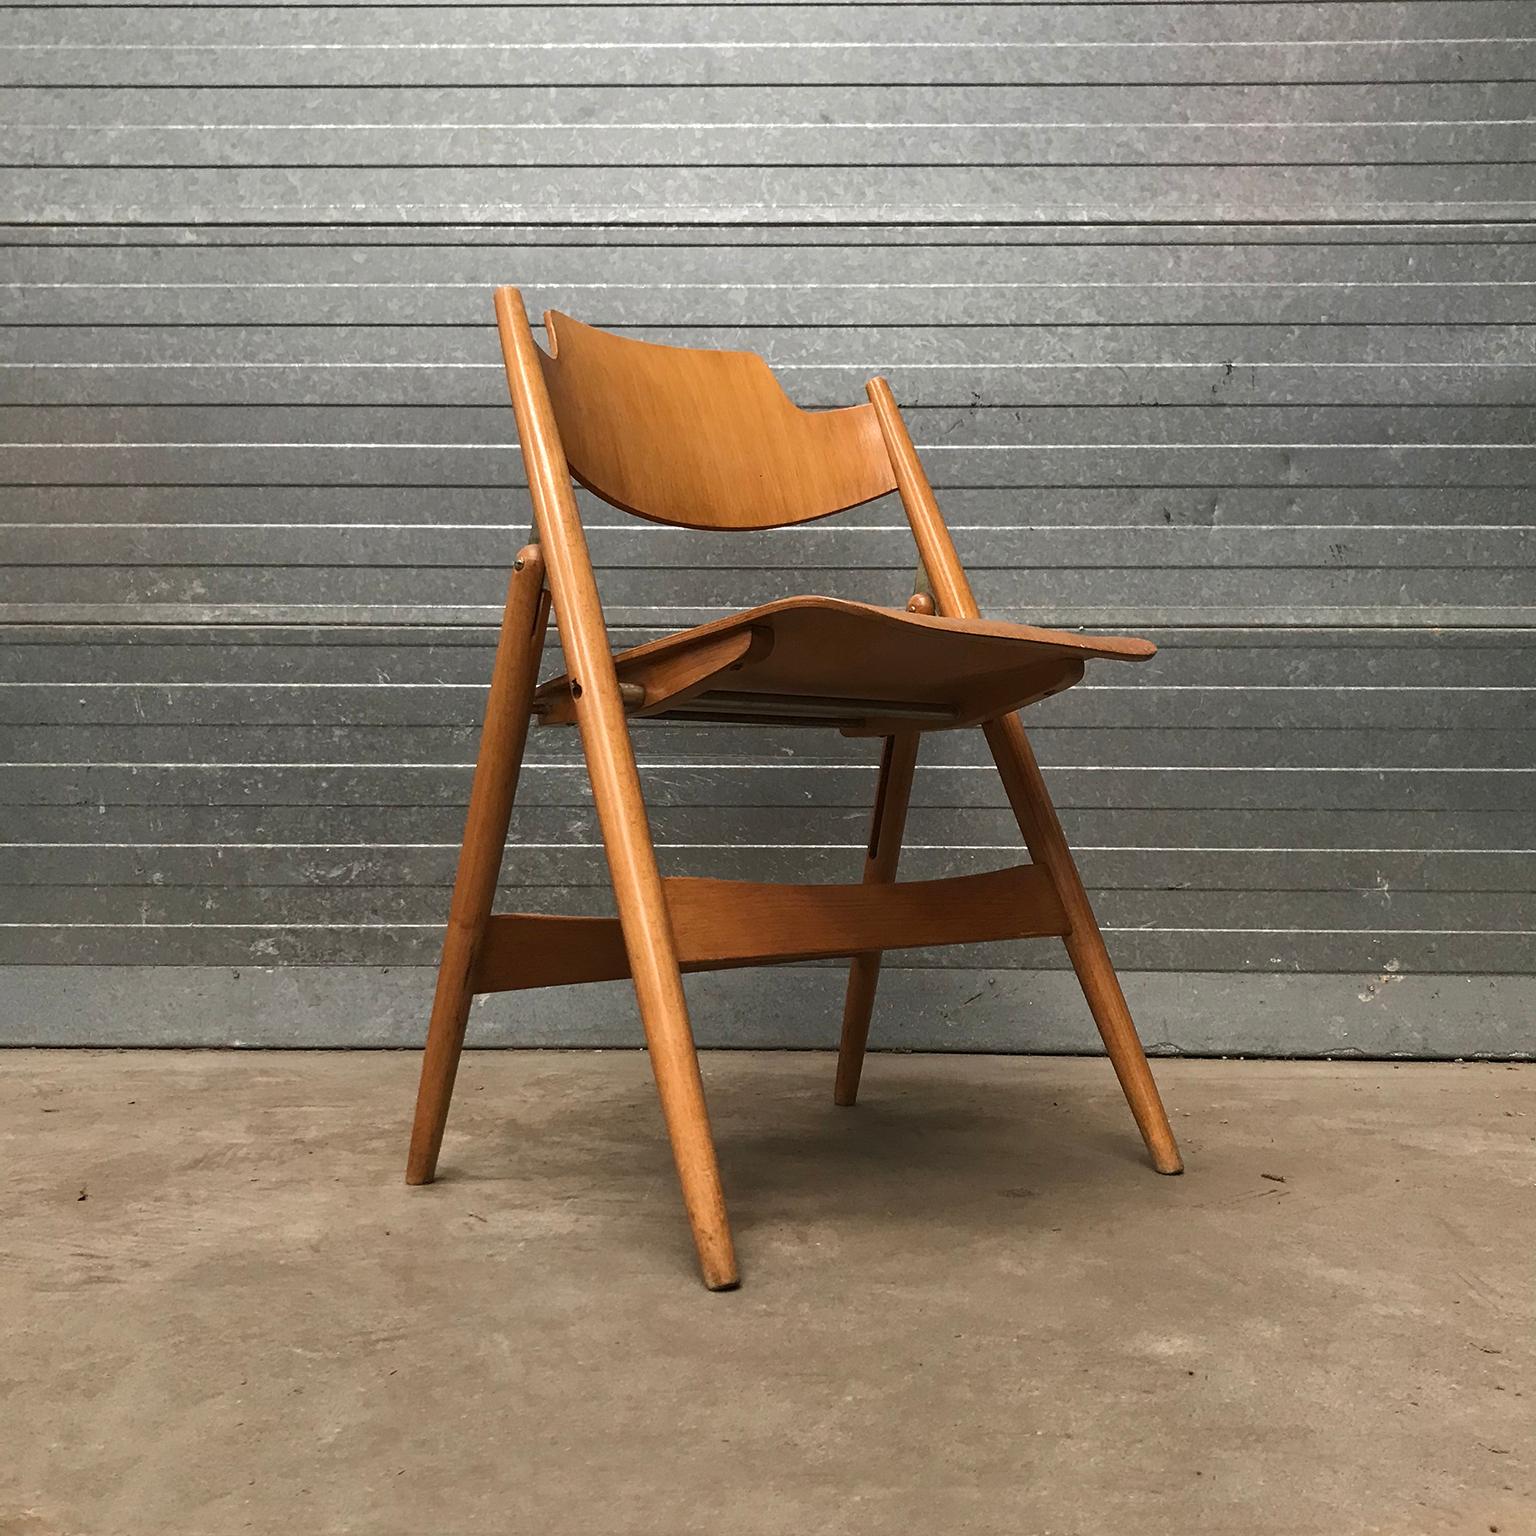 This chair is part of the private collection of Casey Godrie and is situated in his private house. 
Ask him for competitive shipping quotes. His incredible Dune Villa, Amsterdam Beach, check last picture of this listing or  find more details on his